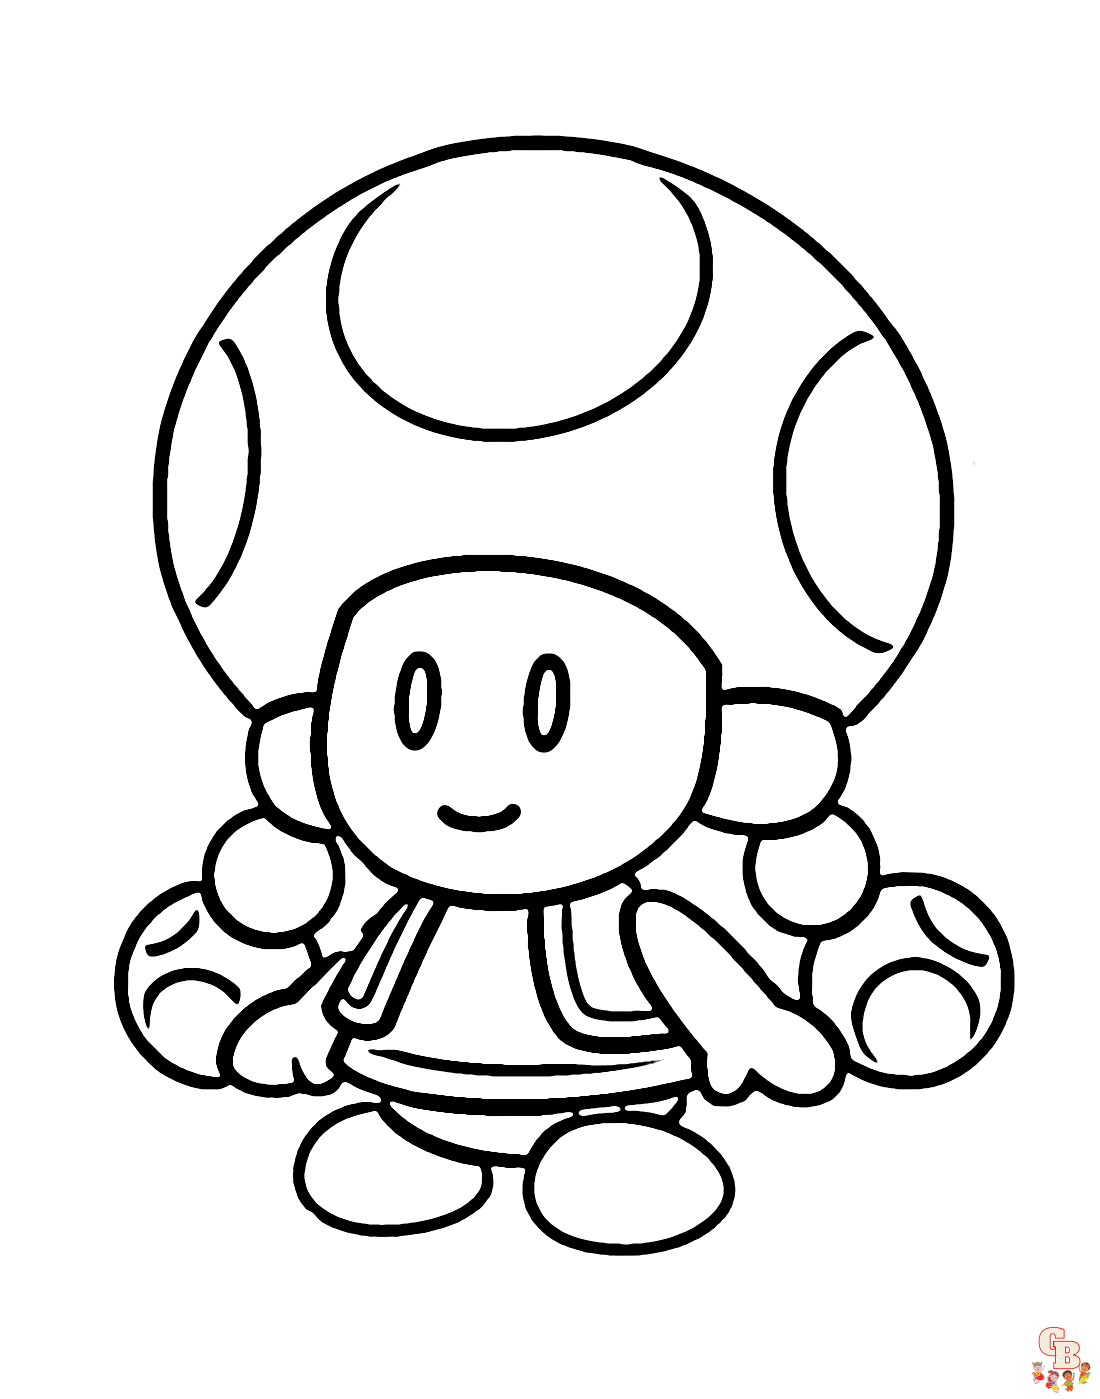 Free toadette coloring pages for kids